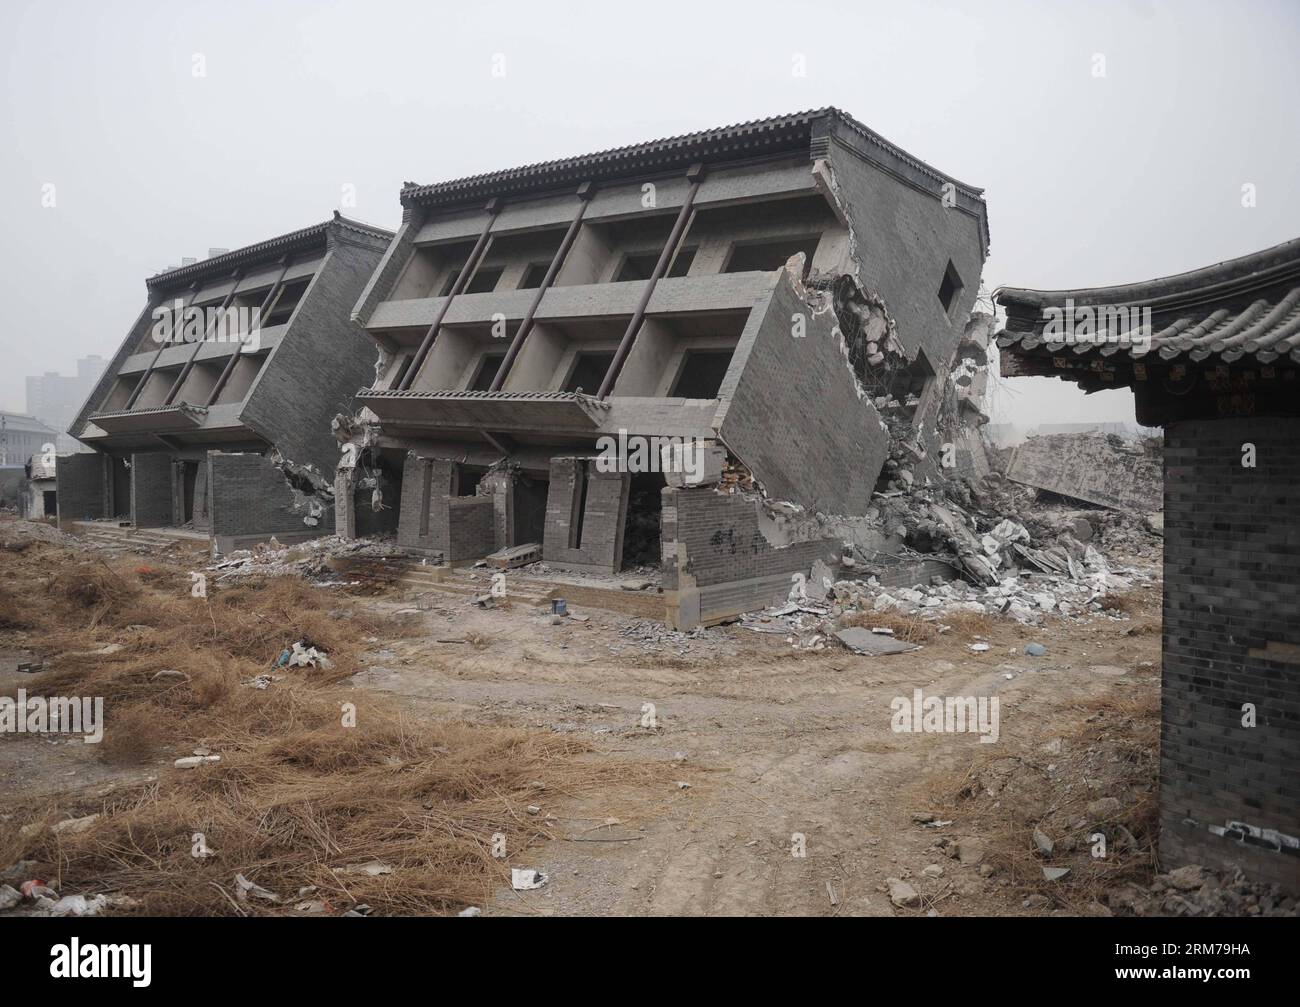 (140220) -- BEIJING, Feb. 20, 2014 (Xinhua) -- Illegal houses are demolished in Zhenggezhuang Village, Beiqijia Township of Changping District on the outskirt of Beijing, China, Feb. 20, 2014. Those illegal houses cover an area of 108.55 mu (about 7.24 hectares) , which will be used for tree planting after complete of demolition. (Xinhua/Luo Xiaoguang) (hdt) CHINA-BEIJING-CHANGPING-ILLEGAL HOUSES-DEMOLITION (CN) PUBLICATIONxNOTxINxCHN   Beijing Feb 20 2014 XINHUA illegal Houses are Demolished in  Village  Township of Chang Ping District ON The outskirts of Beijing China Feb 20 2014 Those illeg Stock Photo